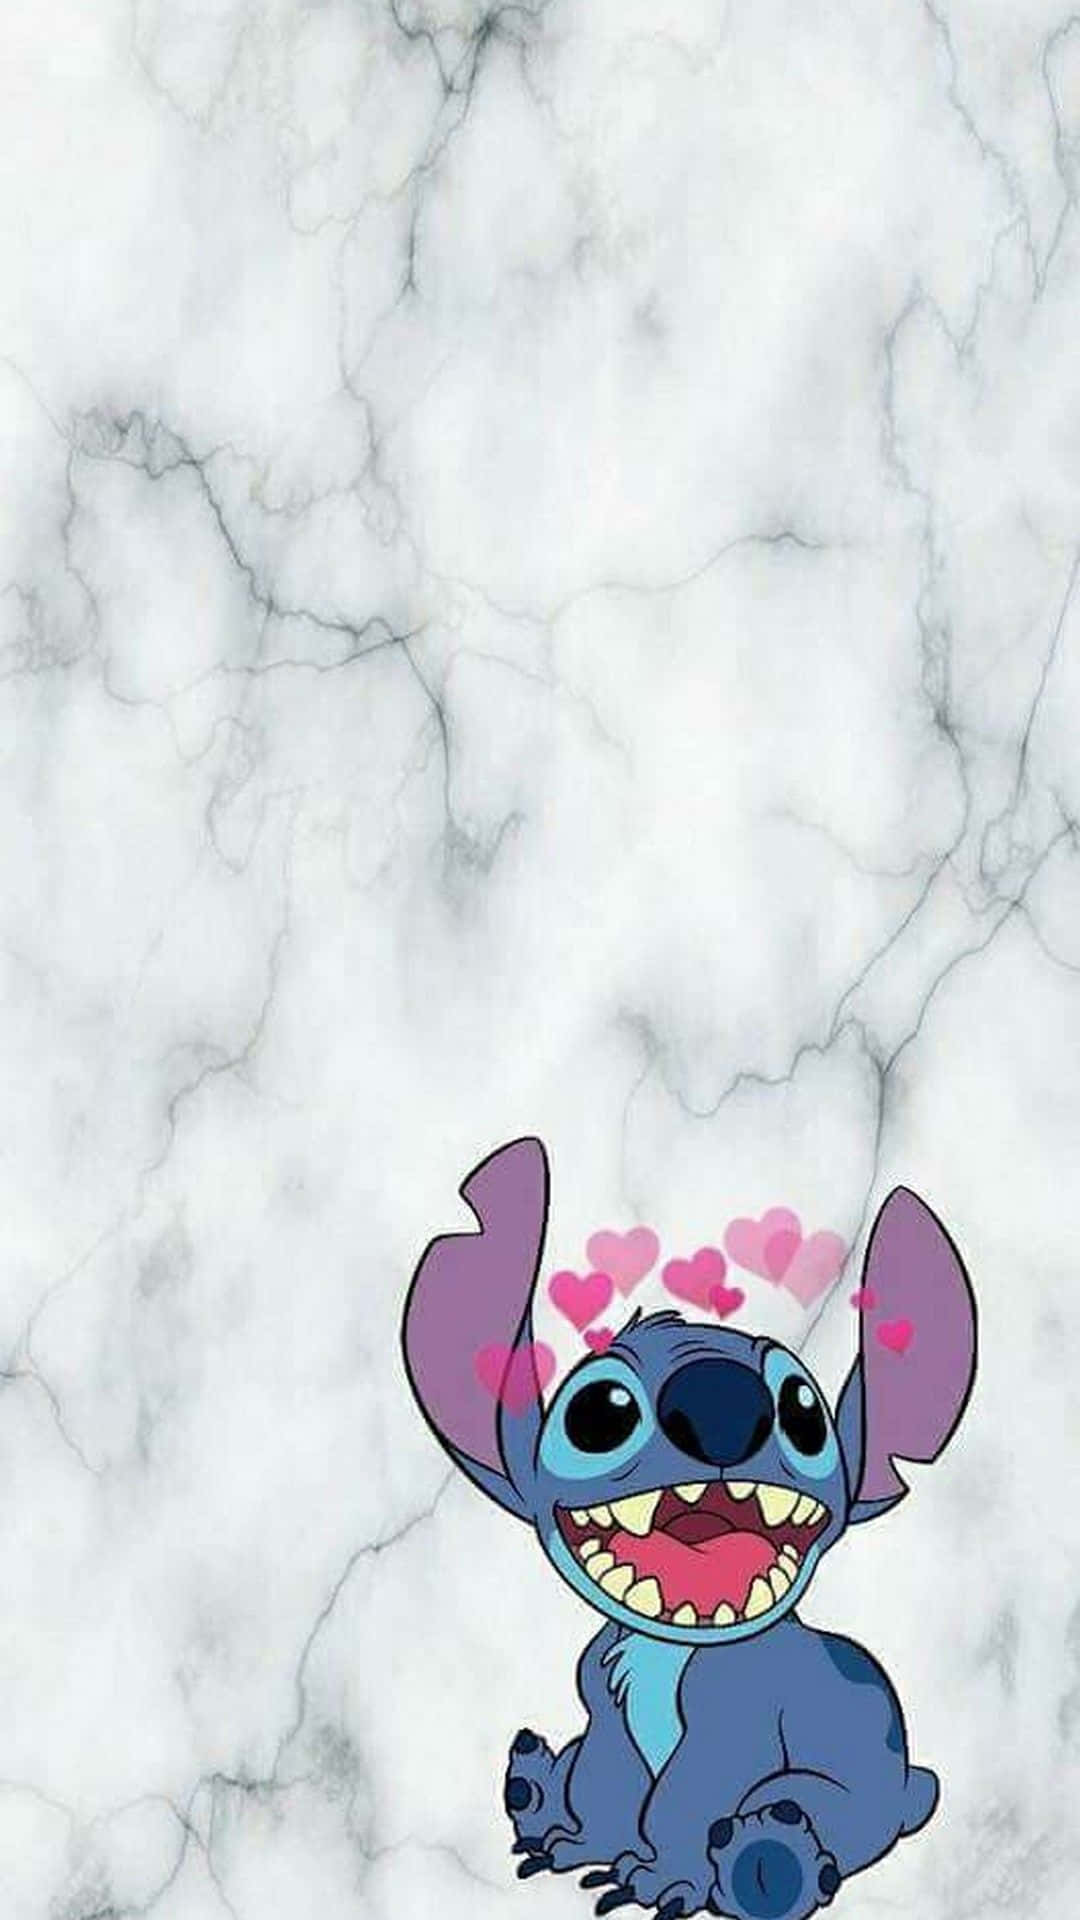 Experience Adventures with Stitch